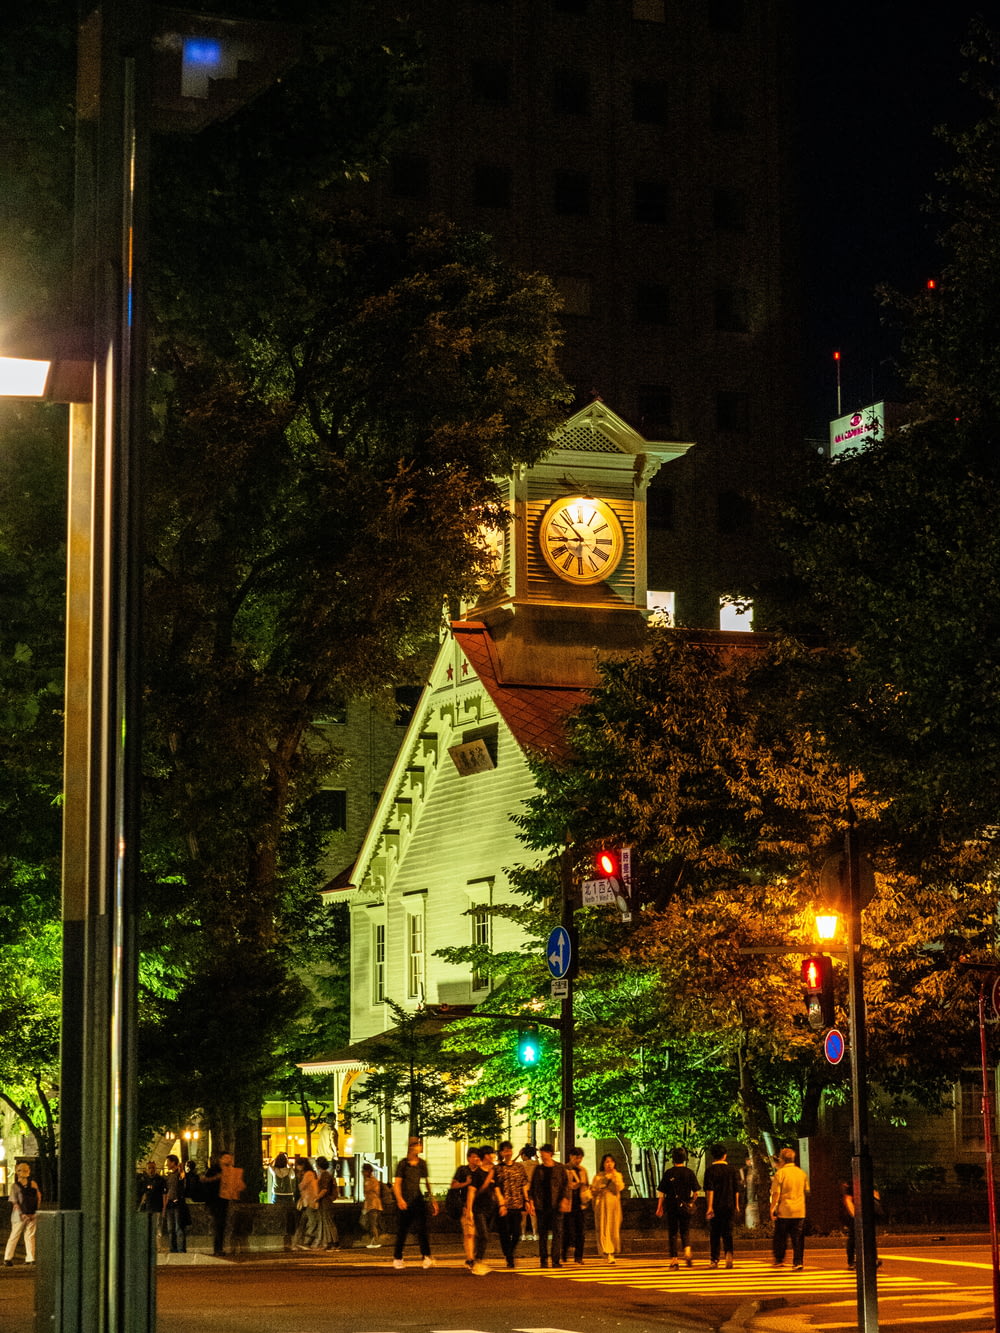 a clock tower in the middle of a city at night